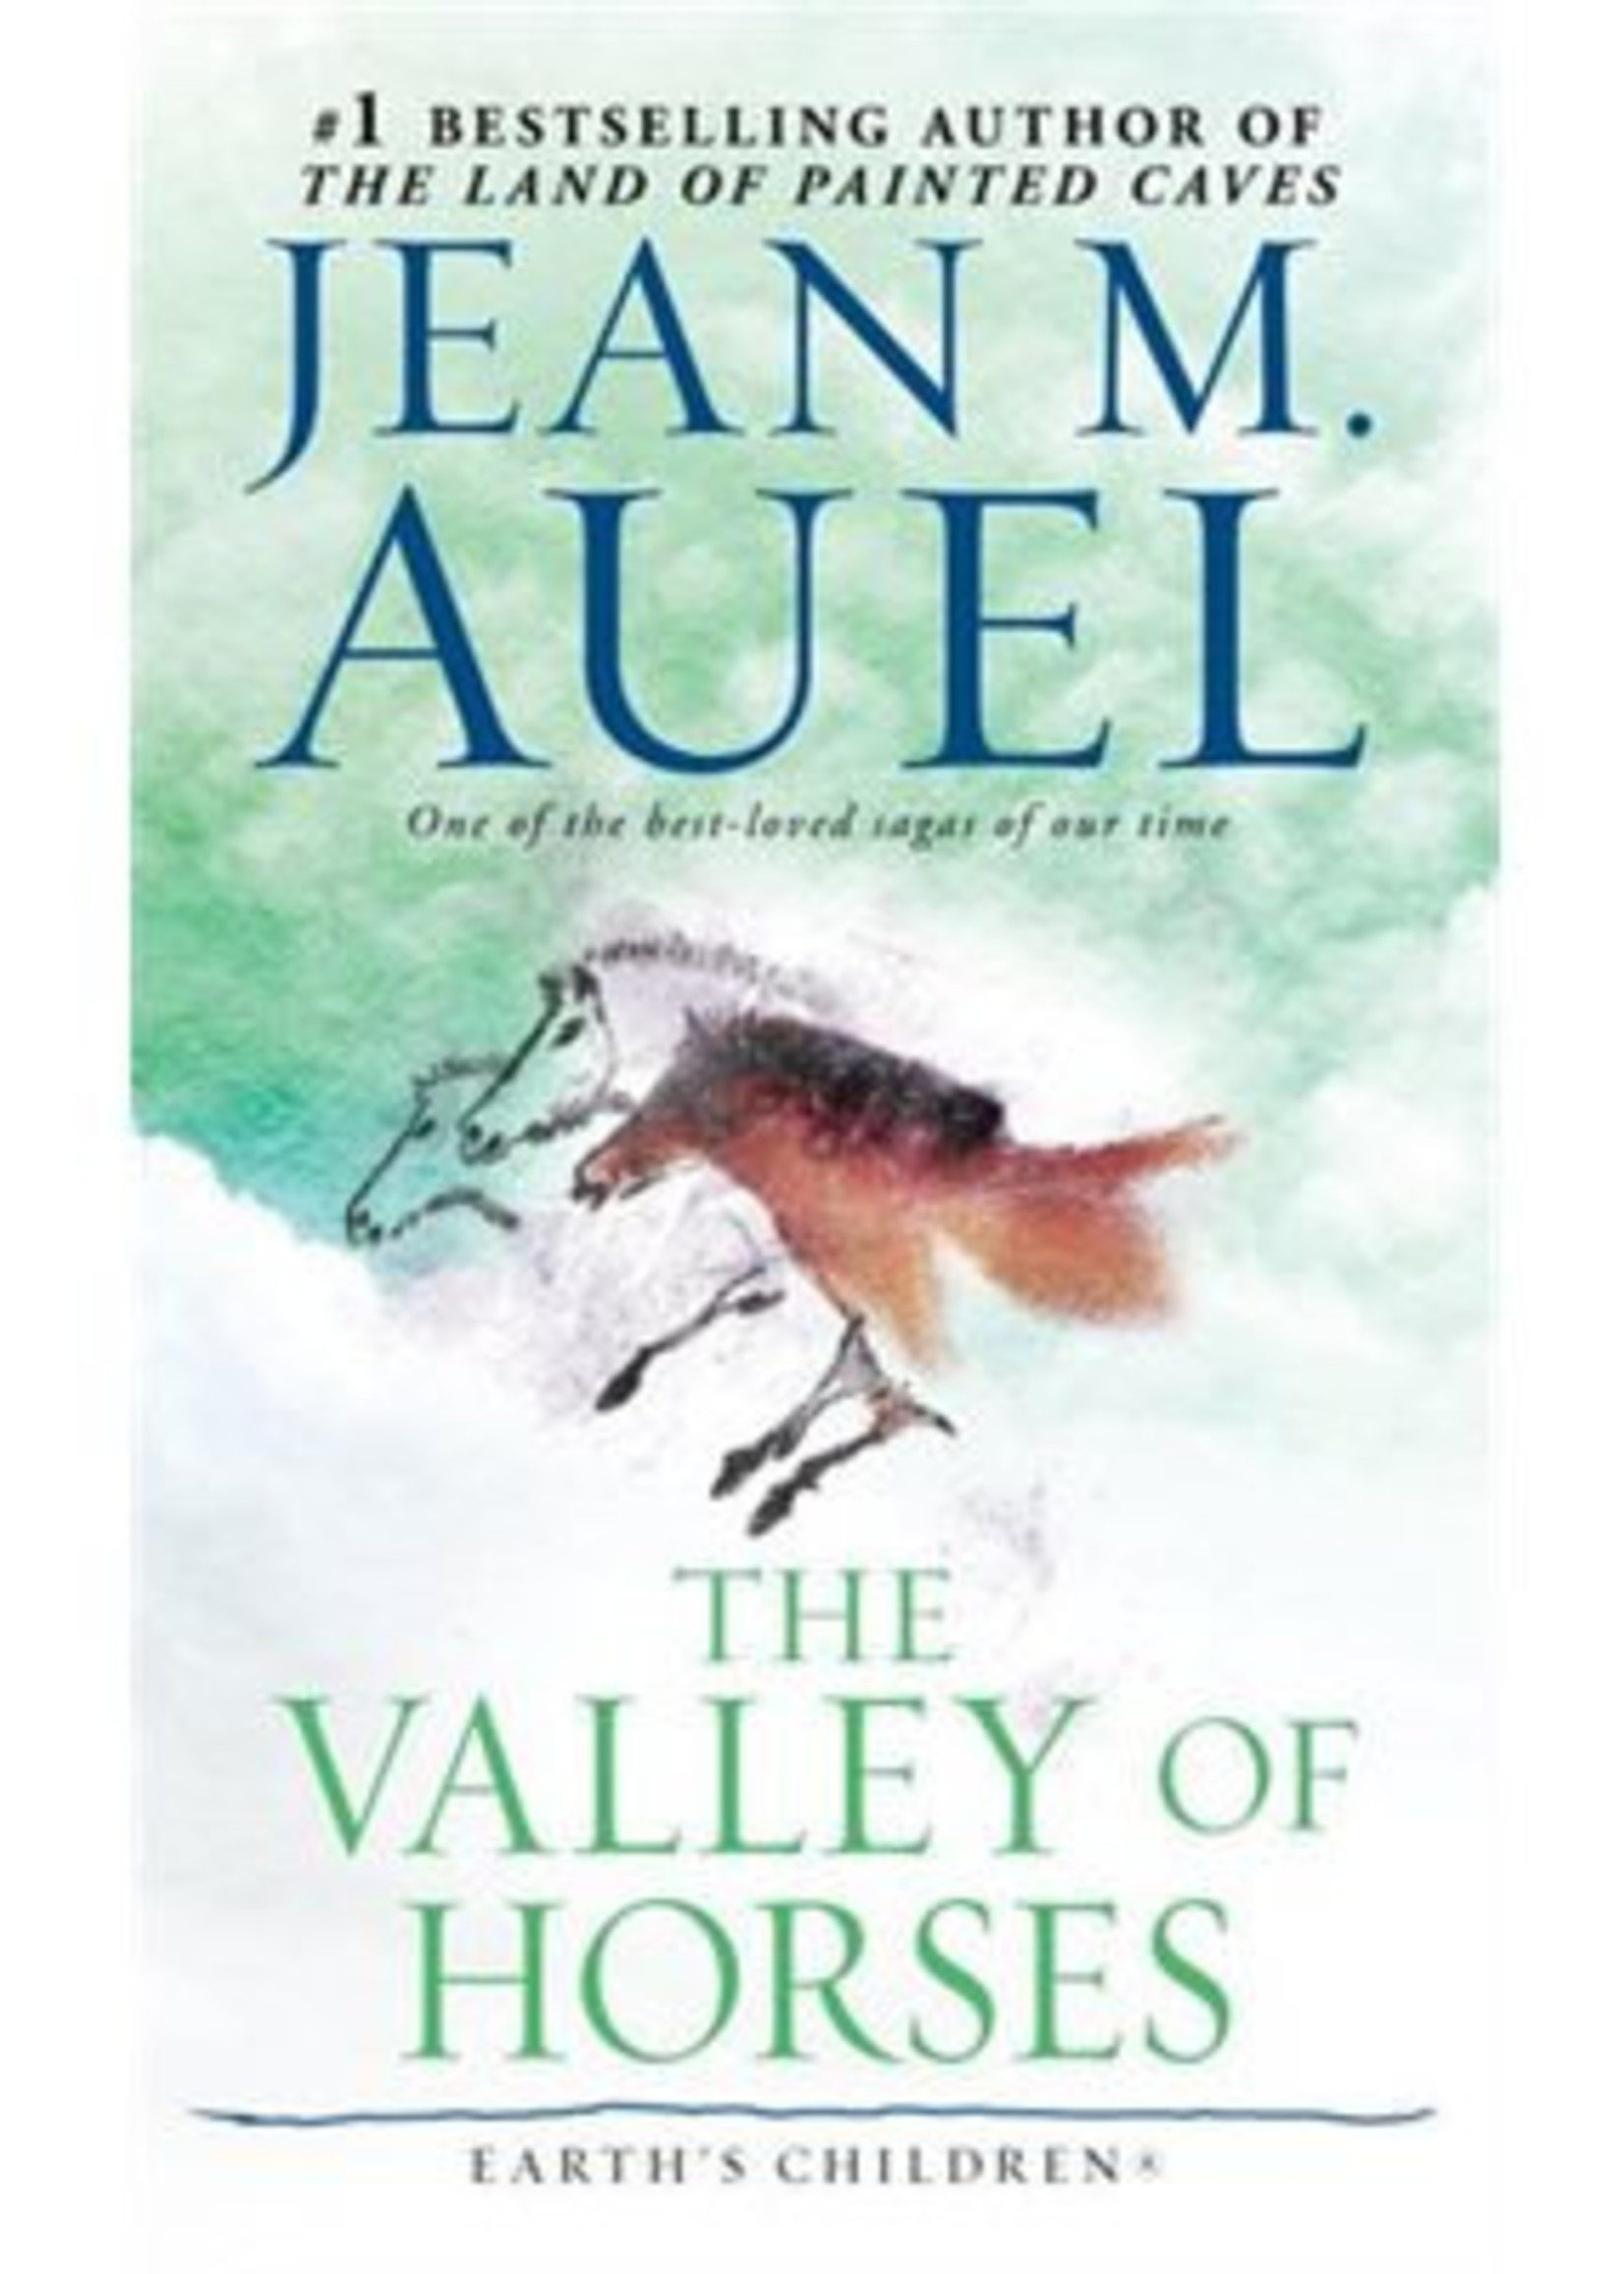 The Valley of Horses (Earth's Children #2) by Jean M. Auel